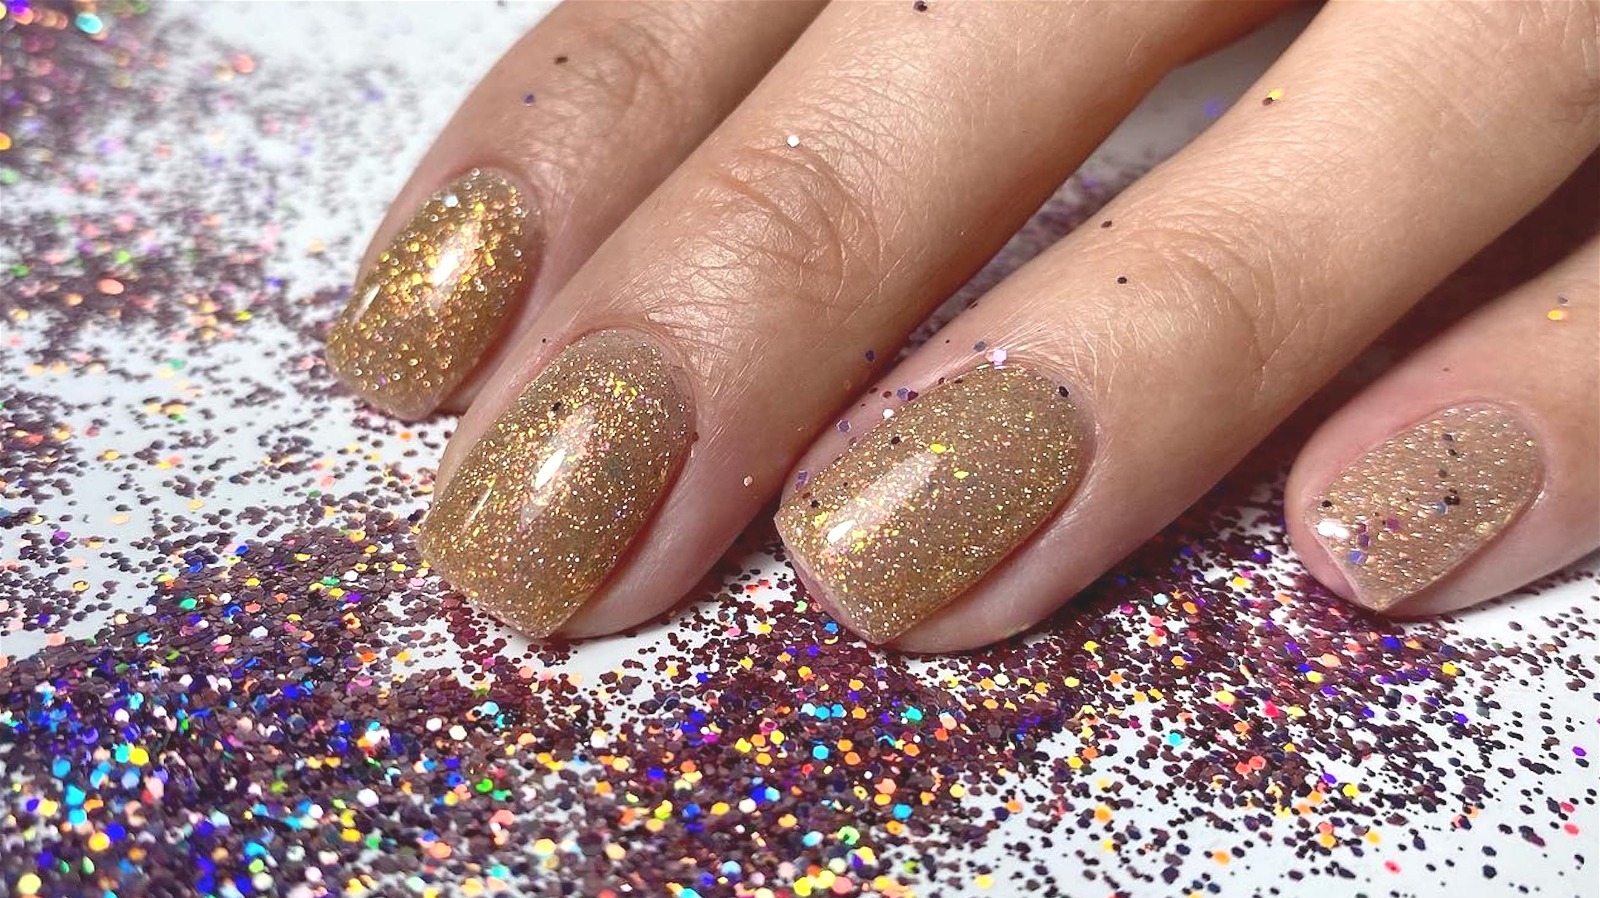 Rodet etage tjener 55 Glitter Nail Designs To Add Some Everyday Sparkle To Your Look